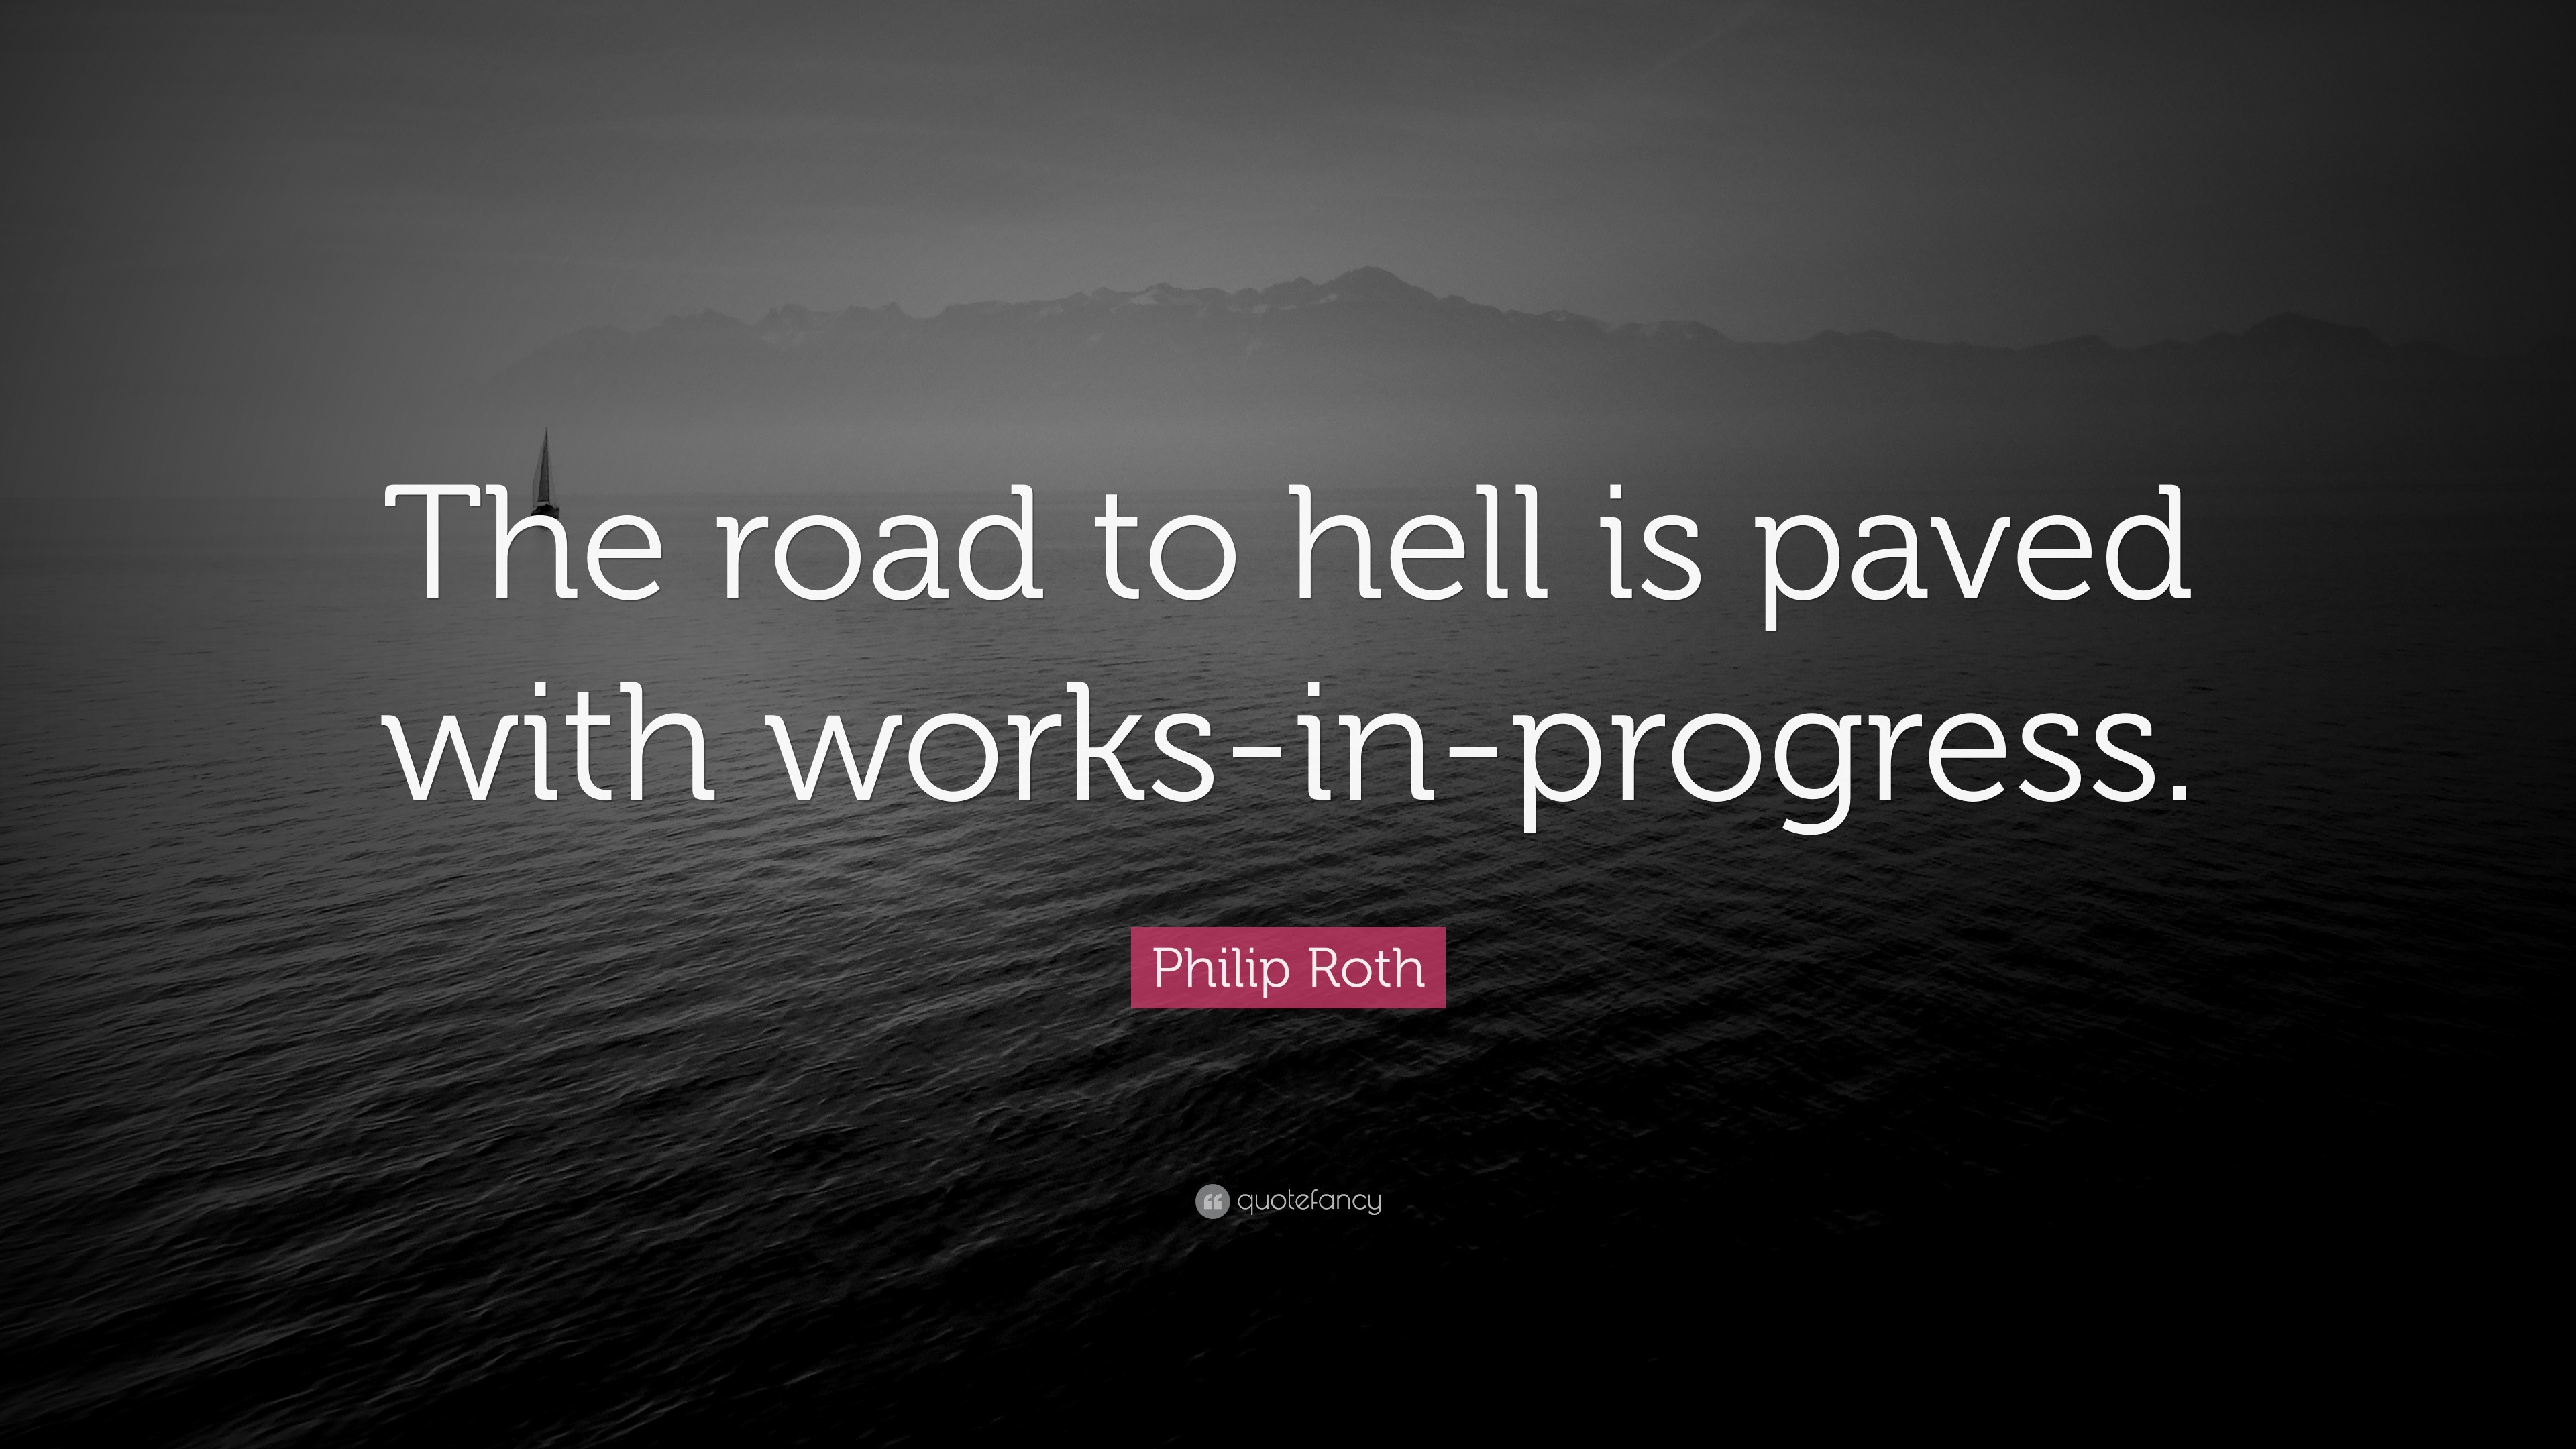 Philip Roth Quote The Road To Hell Is Paved With Works In Images, Photos, Reviews